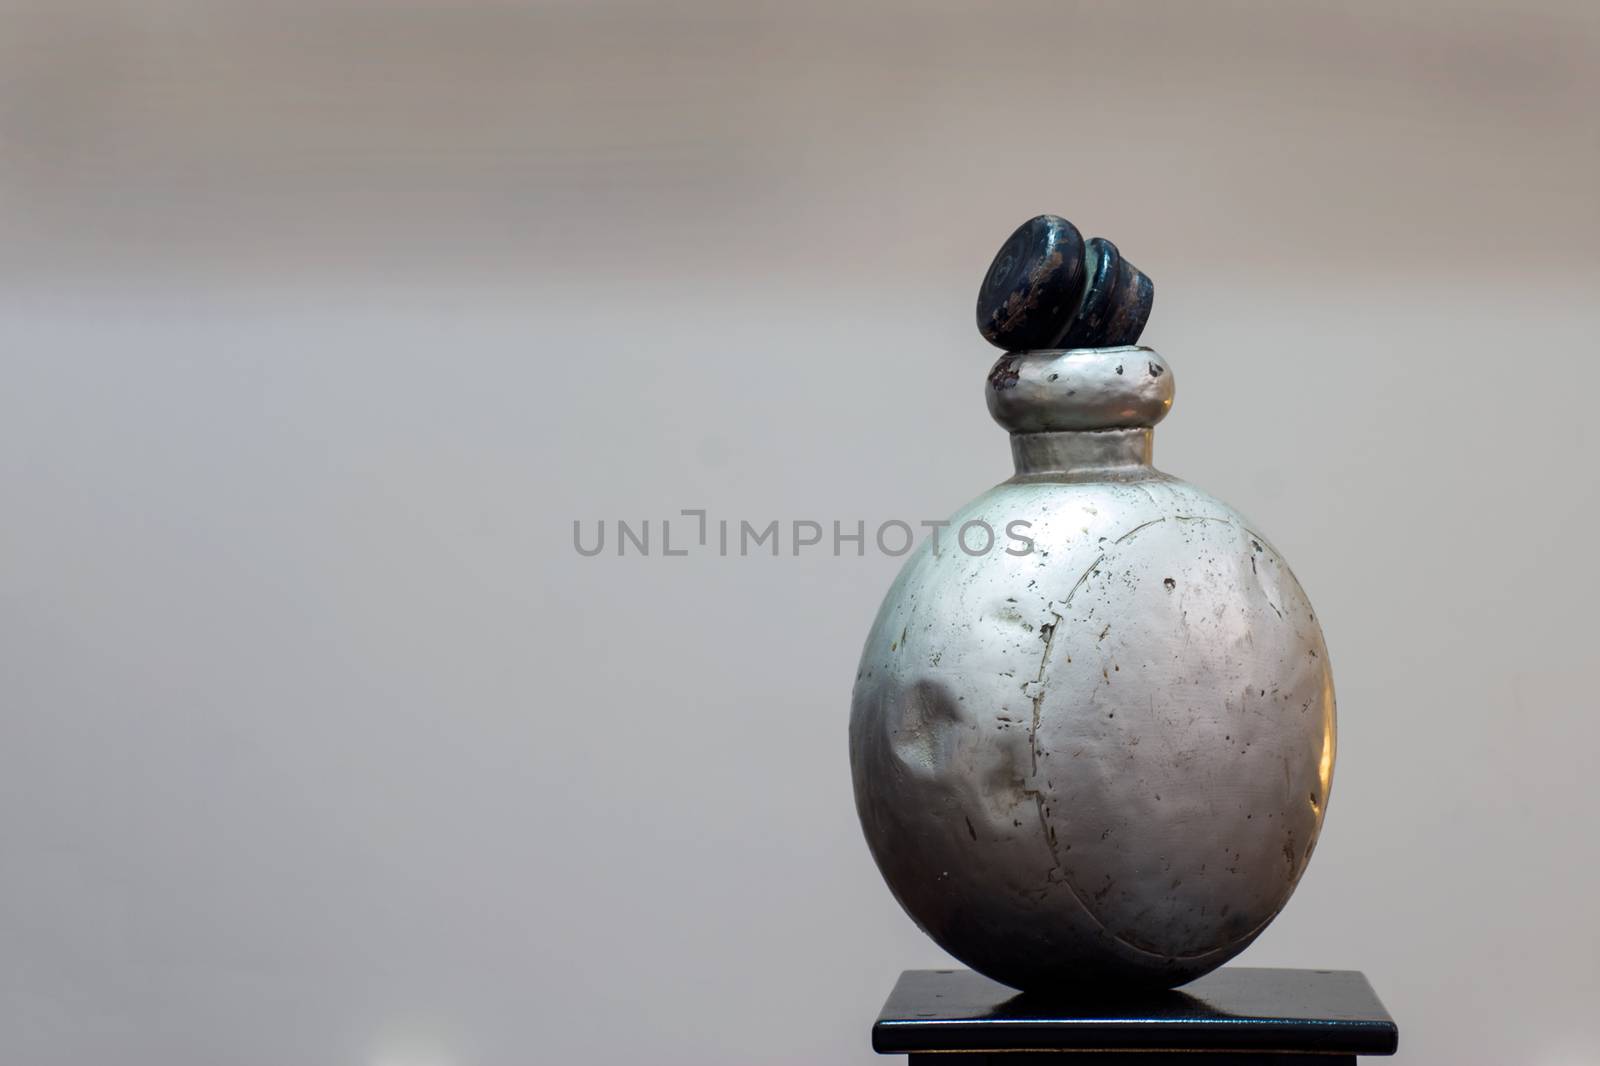 Horizontal color portrait in a studio showroom interior displaying old industrial aluminum chemical bottle standing on an oak table stand plinth. Location for this generic shot was Bombay India, available with property release.